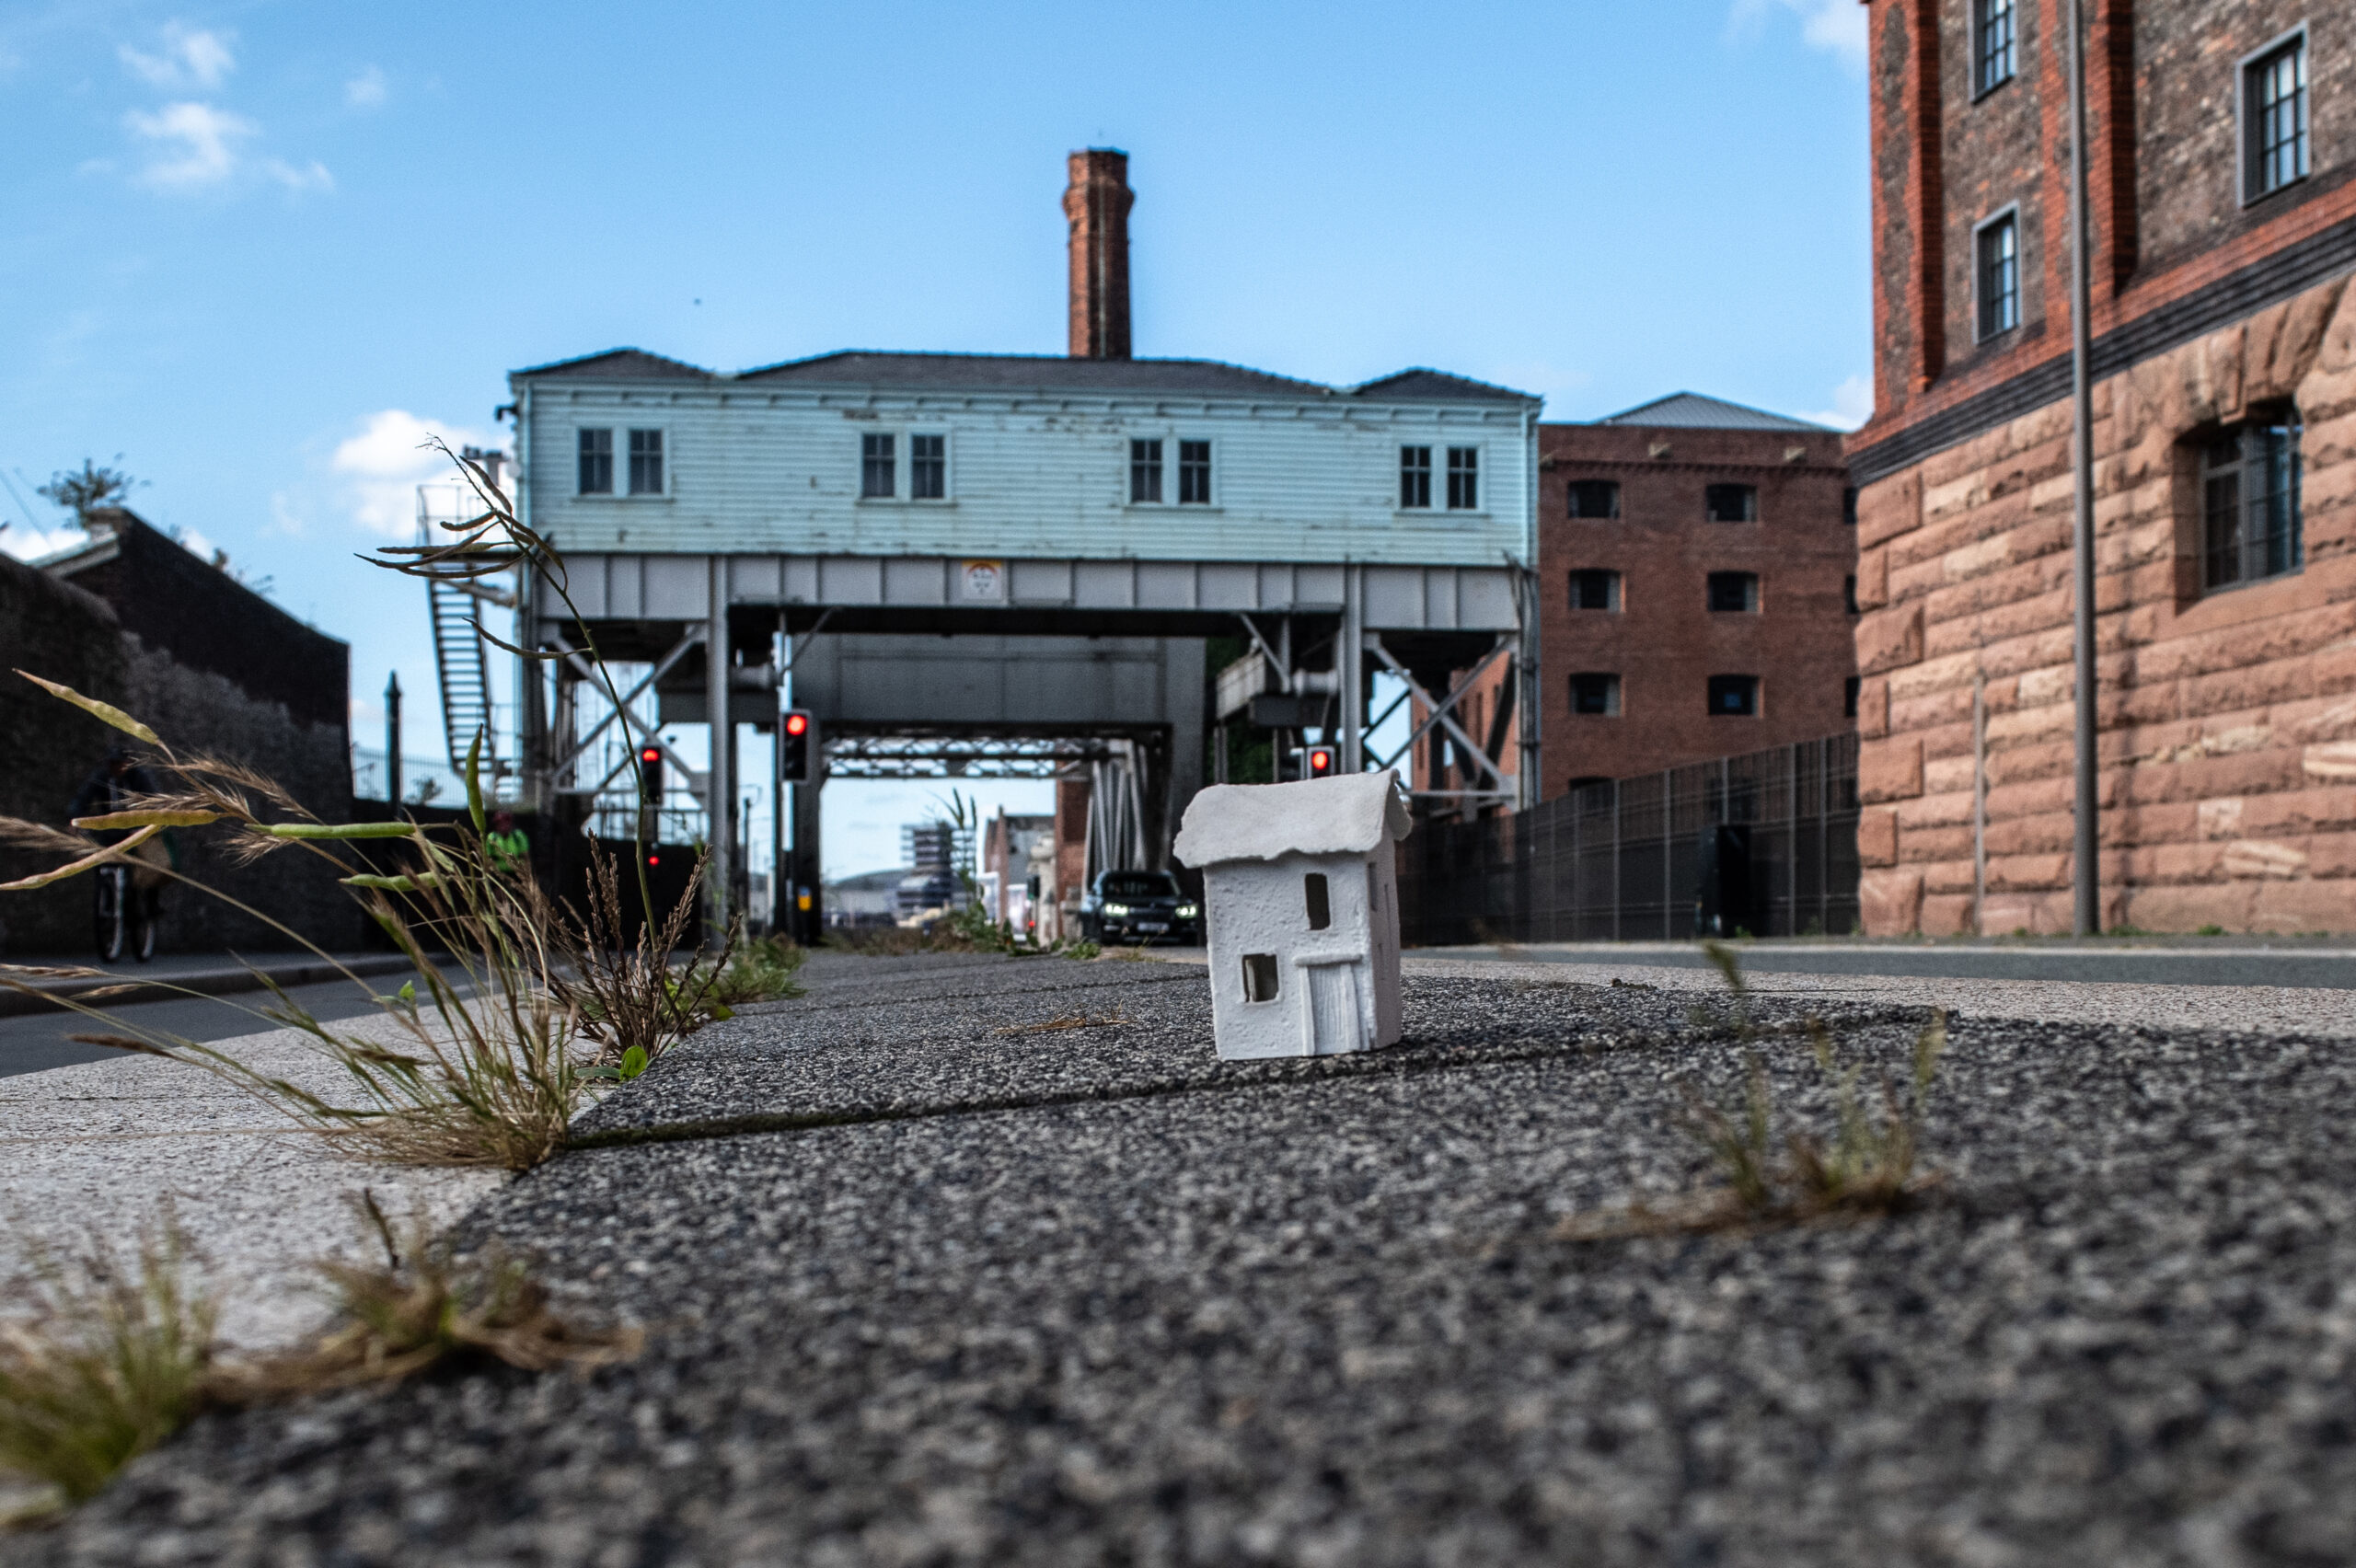 Porcelain house on pavement infront of stilted building.